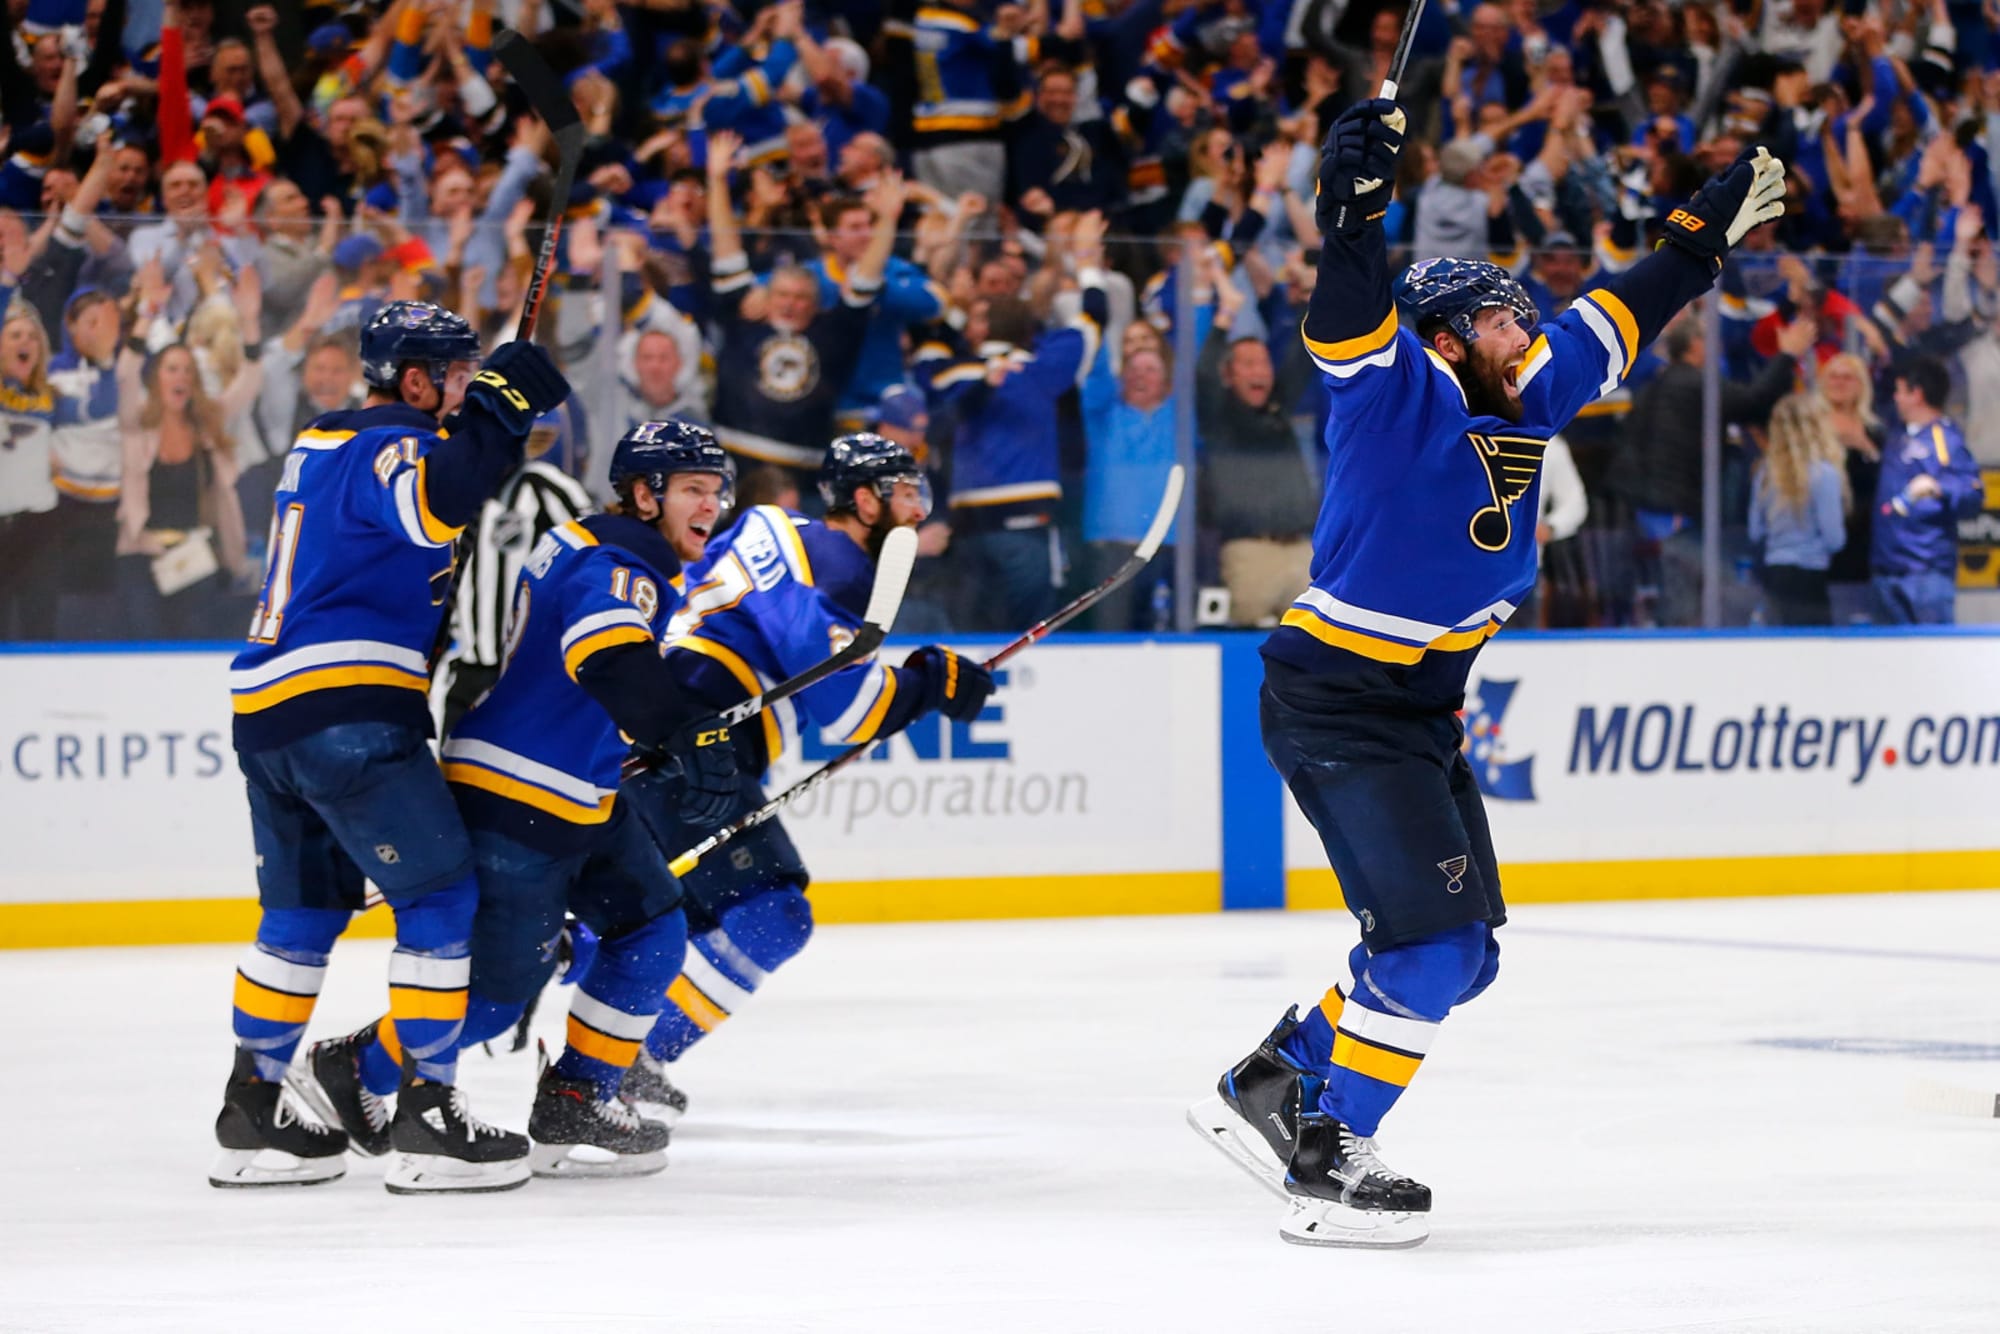 St. Louis Blues Playoff Preview Round 1 vs. Colorado Avalanche